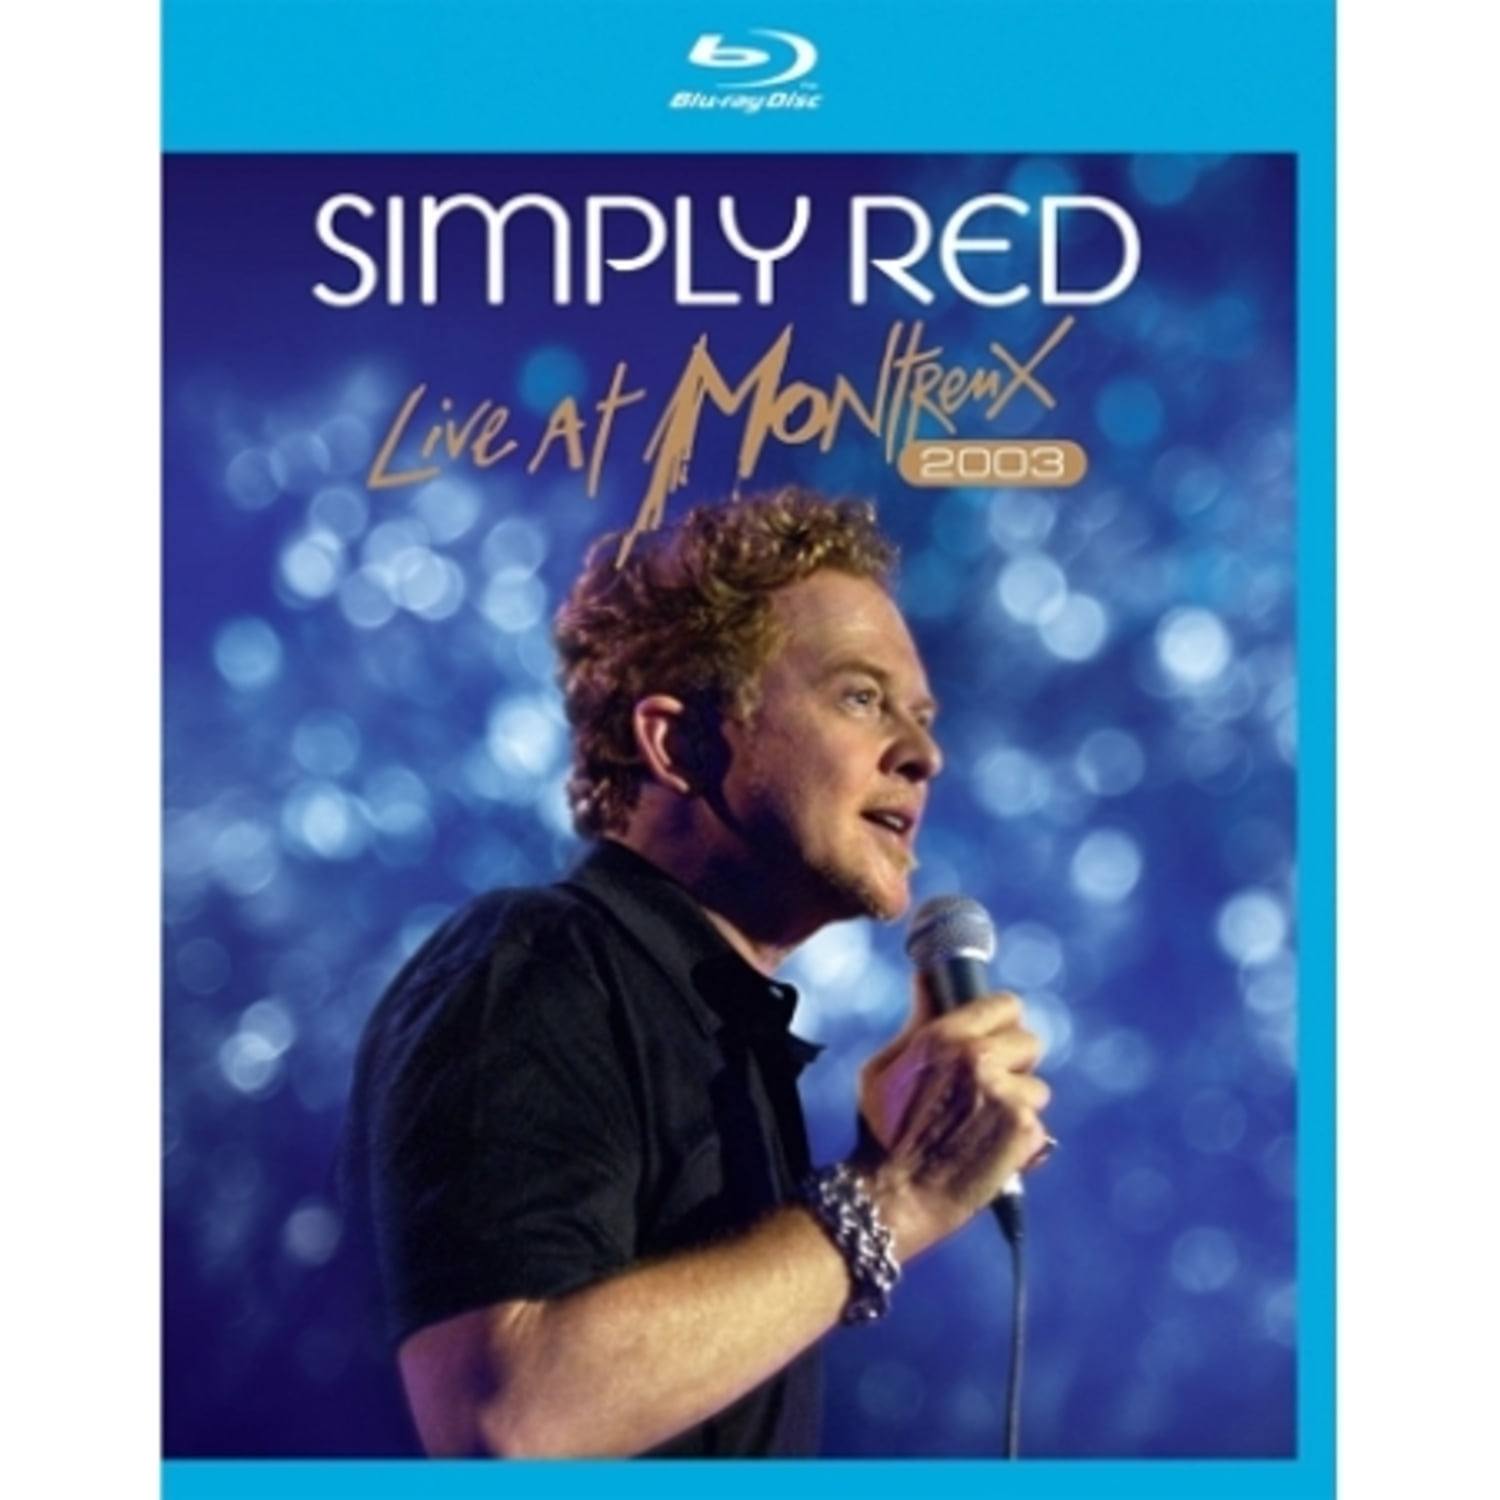 SIMPLY RED - LIVE AT MONTREUX 2003 (1 DISC)